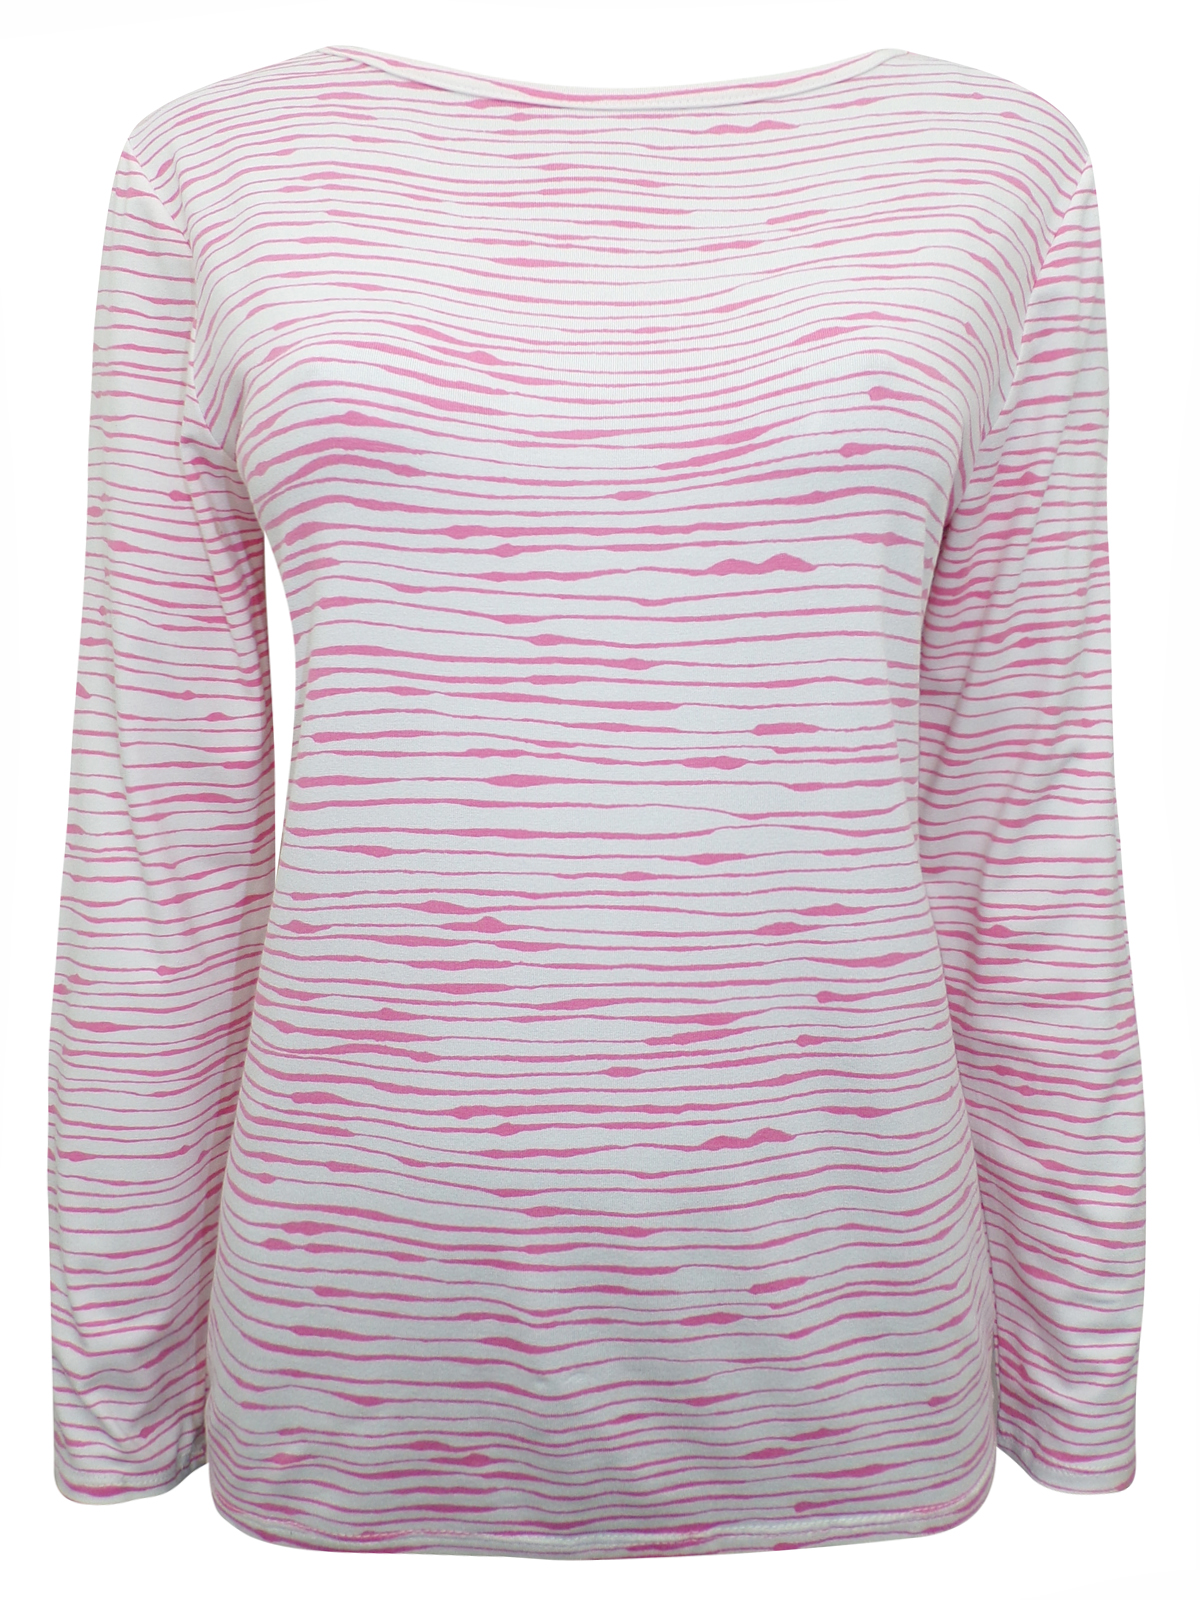 First Avenue PINK Striped Long Sleeve Jersey Top - Size 10 to 14